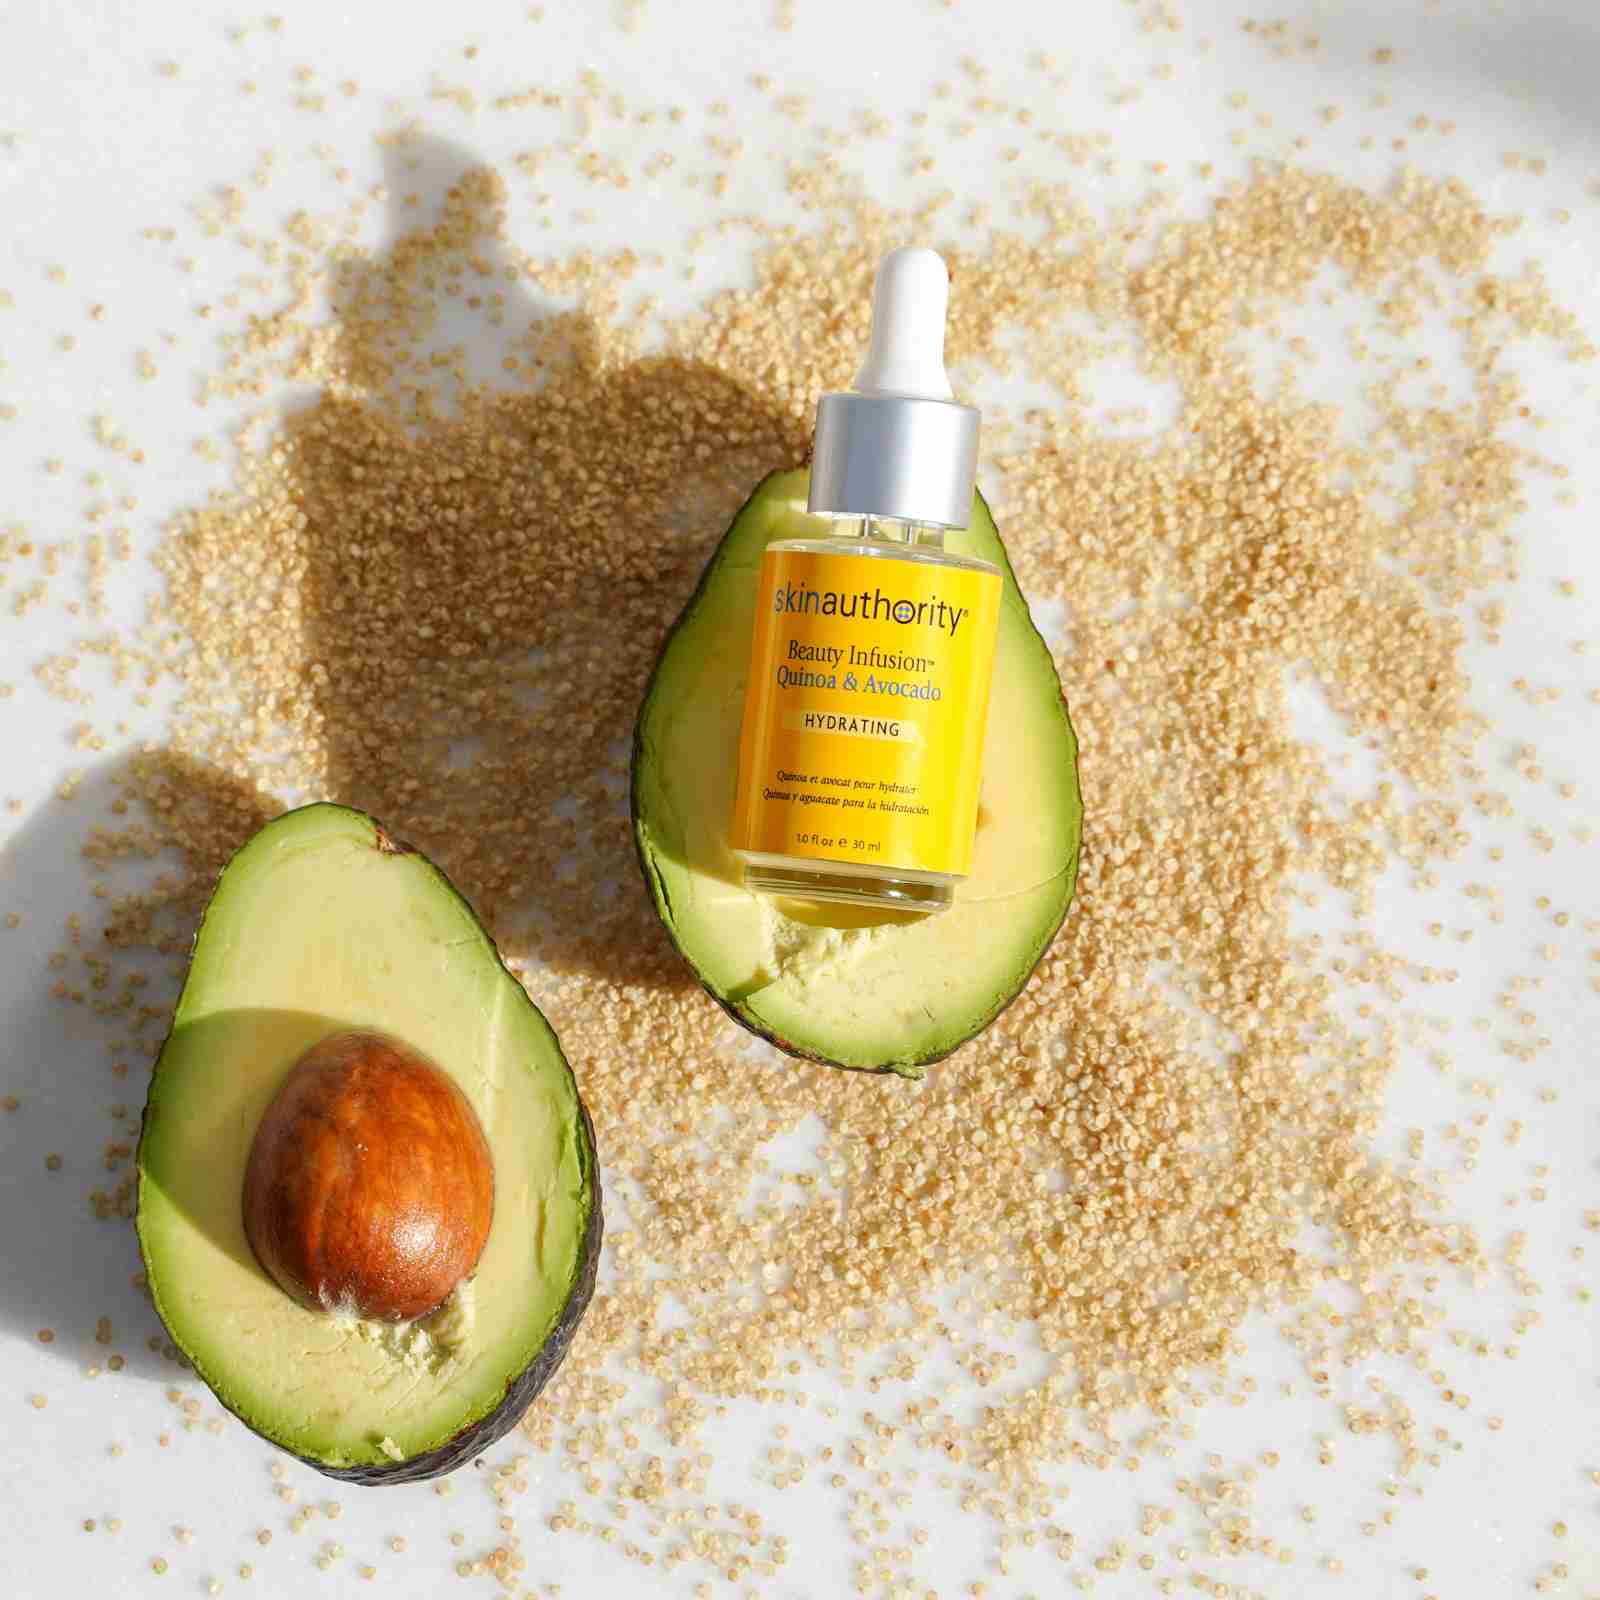 Beauty Infusion Quinoa & Avocado for Hydrating by Skin Authority lifestyle image